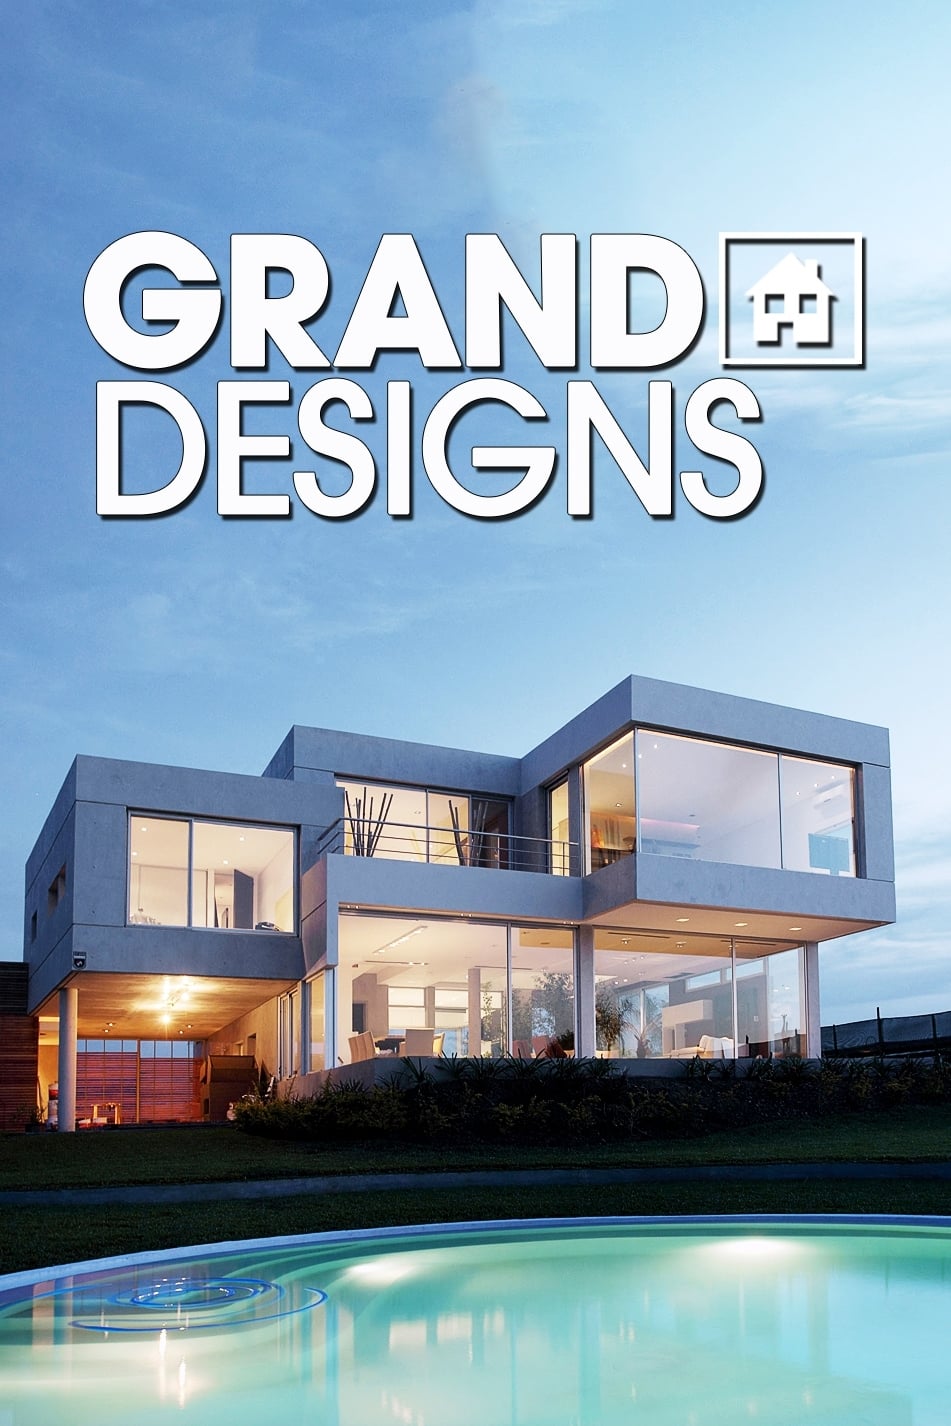 Cast Talks To Grand Design’s Kevin McCloud About The Potential For Modular Homes In UK - Cast